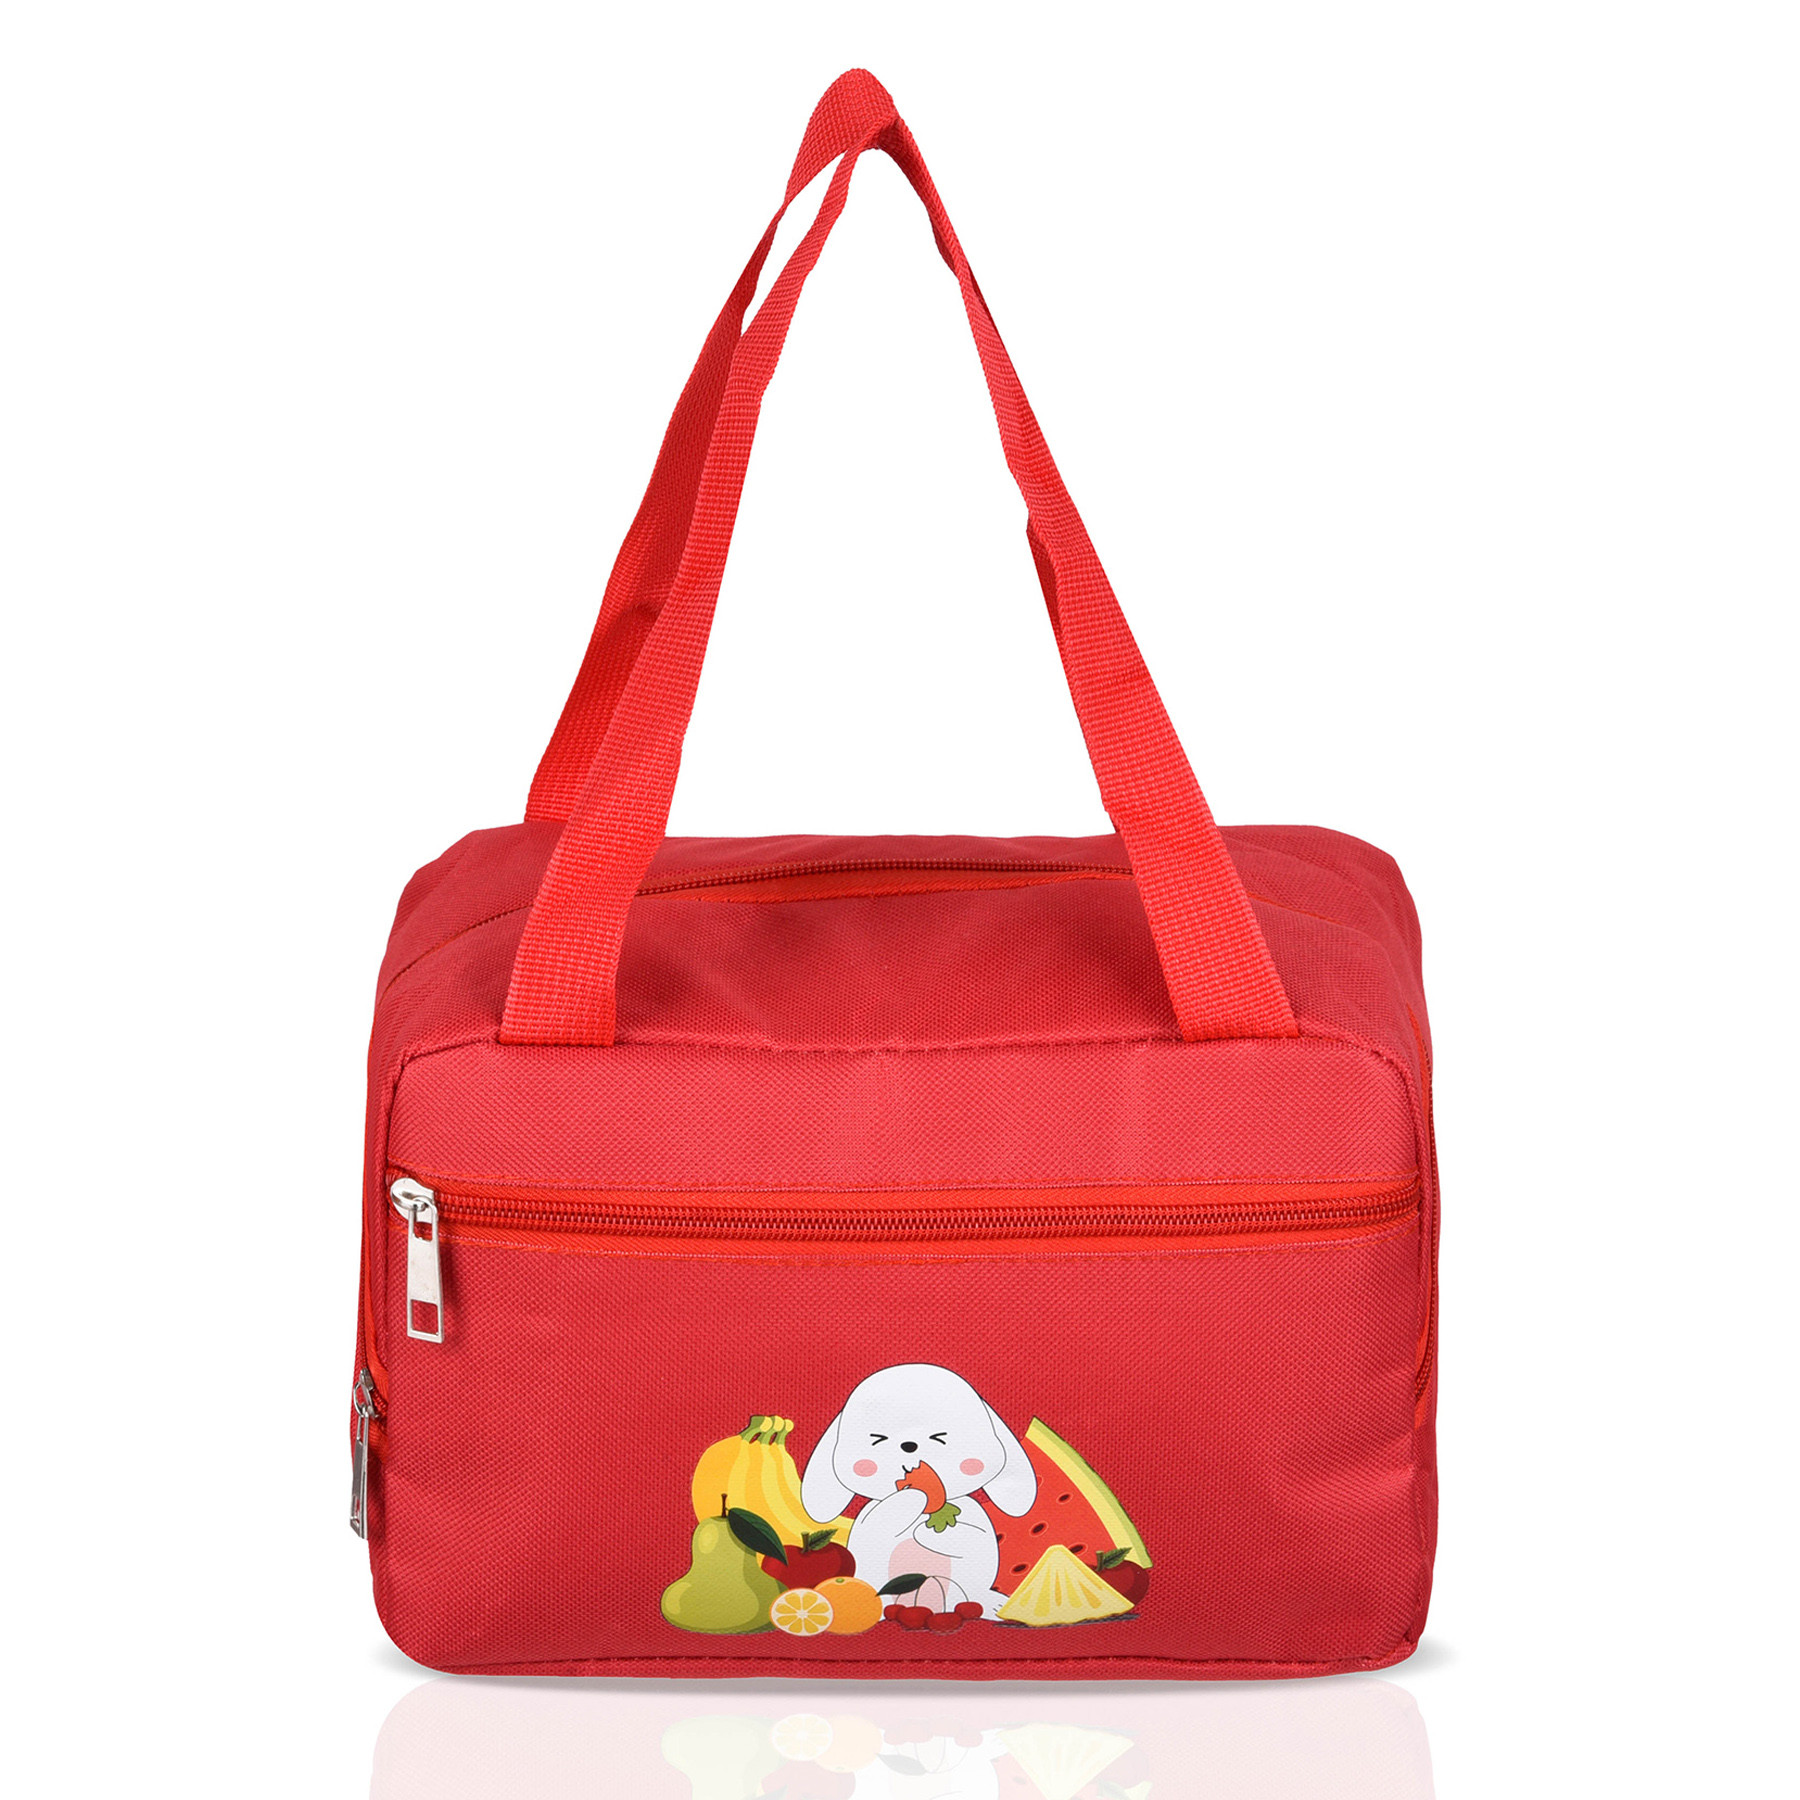 Kuber Industries Lunch Bag | Thermal Insulated Lunch Bag | Lunch Bag for Office | Lunch Bag for Camping with Front Pocket | Waterproof Tiffin Cover with Handle | Fruit Rabbit-Print | Red